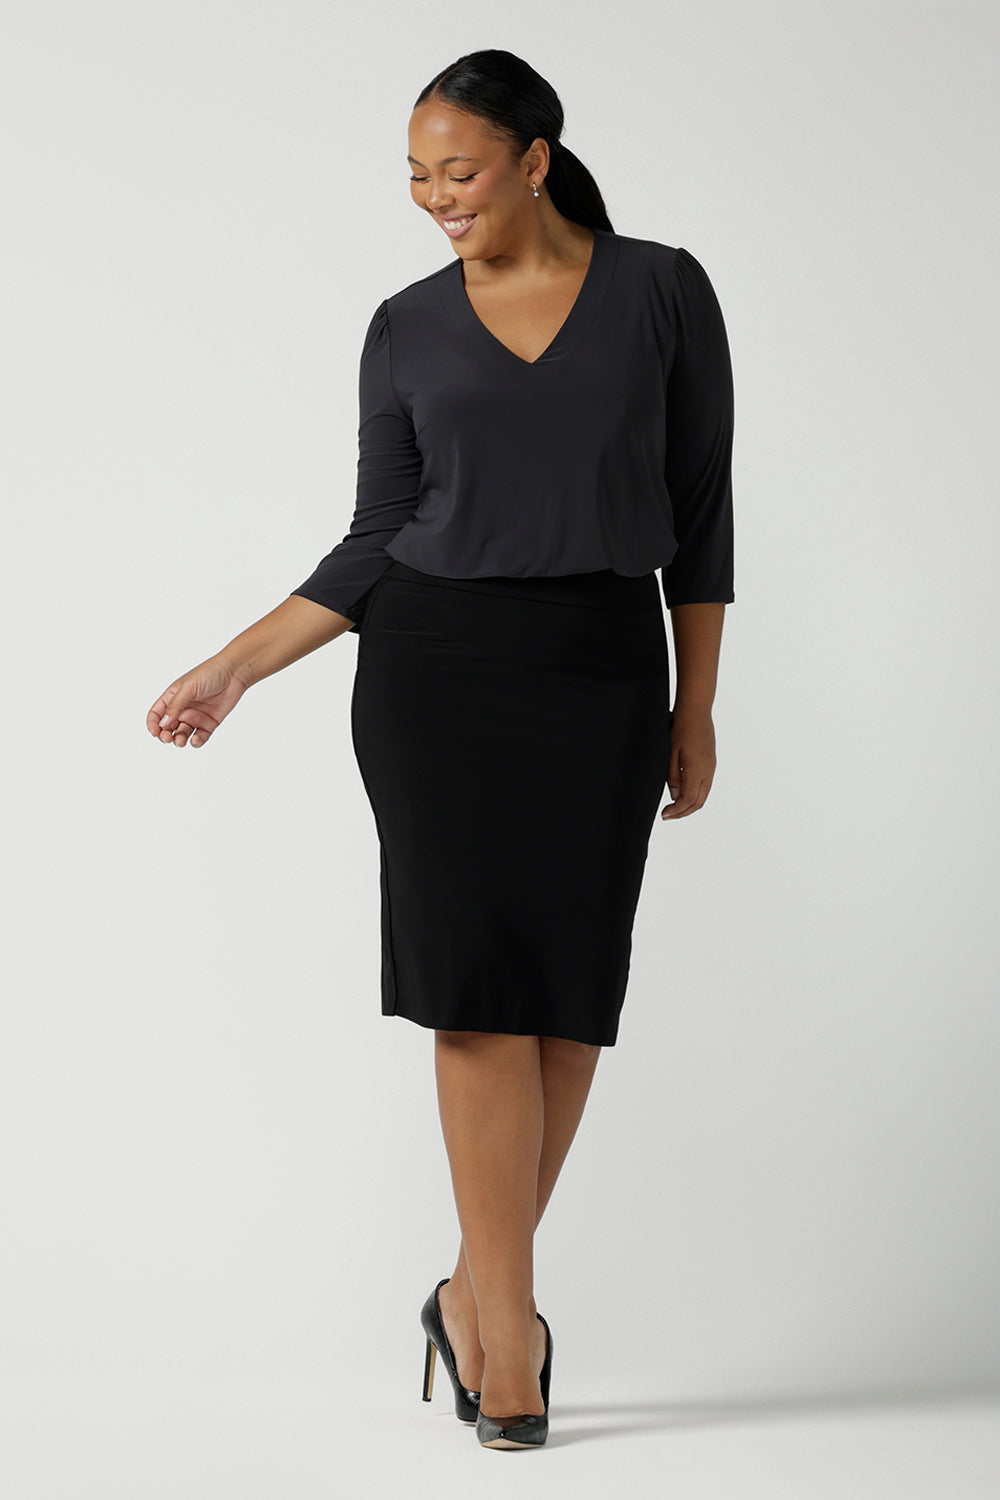 Size 16 woman wears the Vida top in Charcoal, a grey work top for women with a V-neckline. Comfortable corporate workwear for women. Made in Australia for women. Size 8 - 24. Styled back with a black slim fit Andi skirt and black pumps.